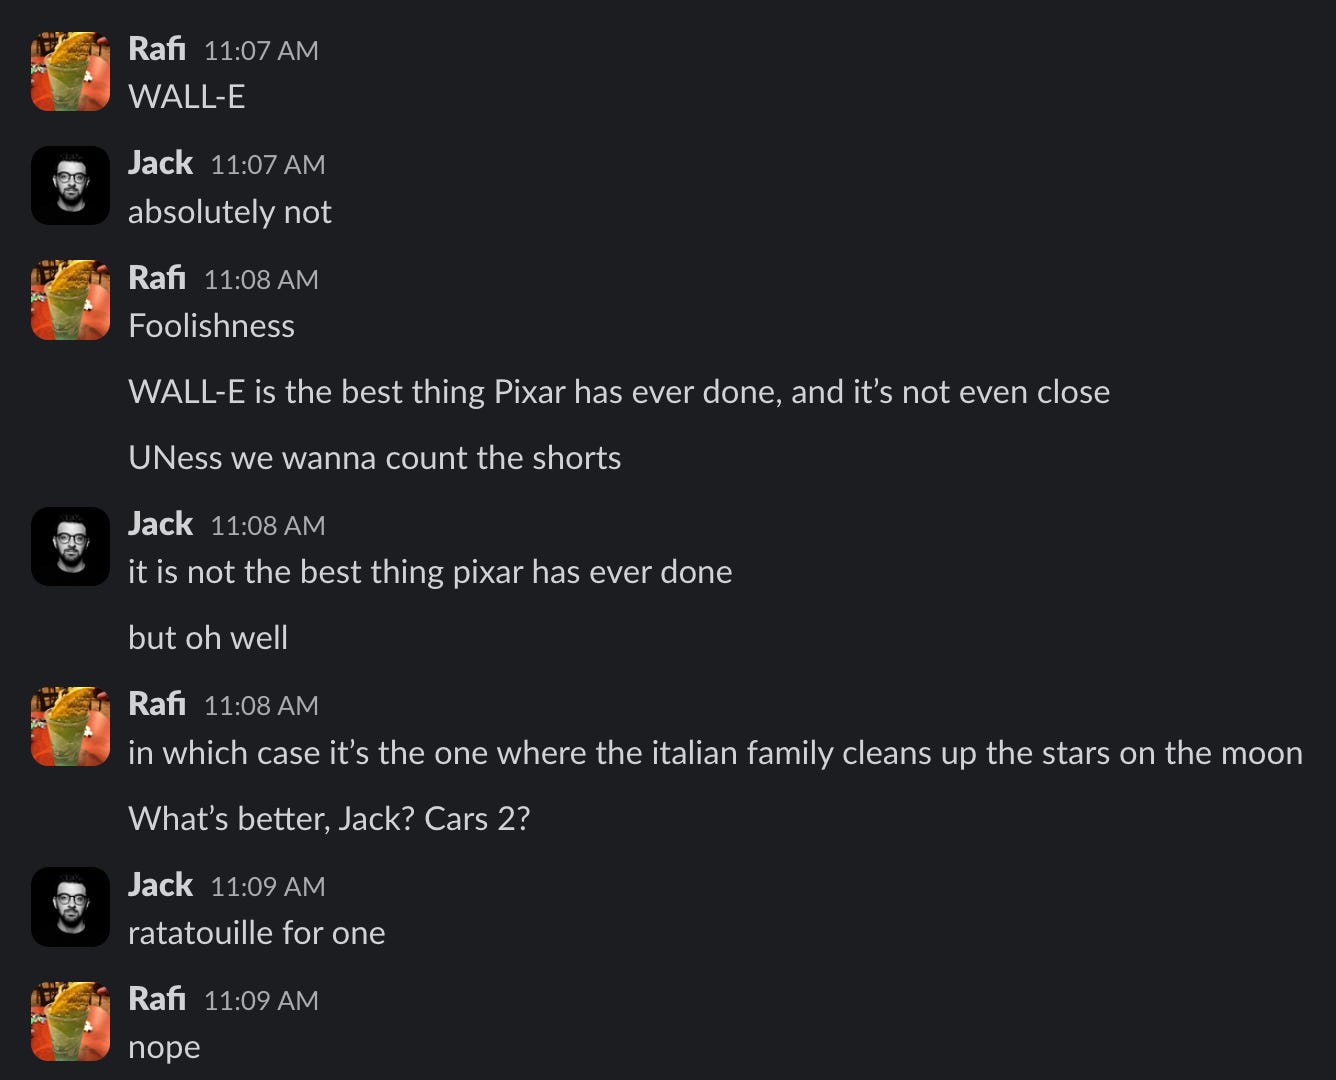 Rafi 11:07 AM WALL-E Jack 11:07 AM absolutely not Rafi 11:08 AM Foolishness WALL-E is the best thing Pixar has ever done, and it's not even close UNess we wanna count the shorts Jack 11:08 AM it is not the best thing pixar has ever done but oh well Rafi 11:08 AM in which case it's the one where the italian family cleans up the stars on the moon What's better, Jack? Cars 2? Jack 11:09 AM ratatouille for one Rafi 11:09 AM поре